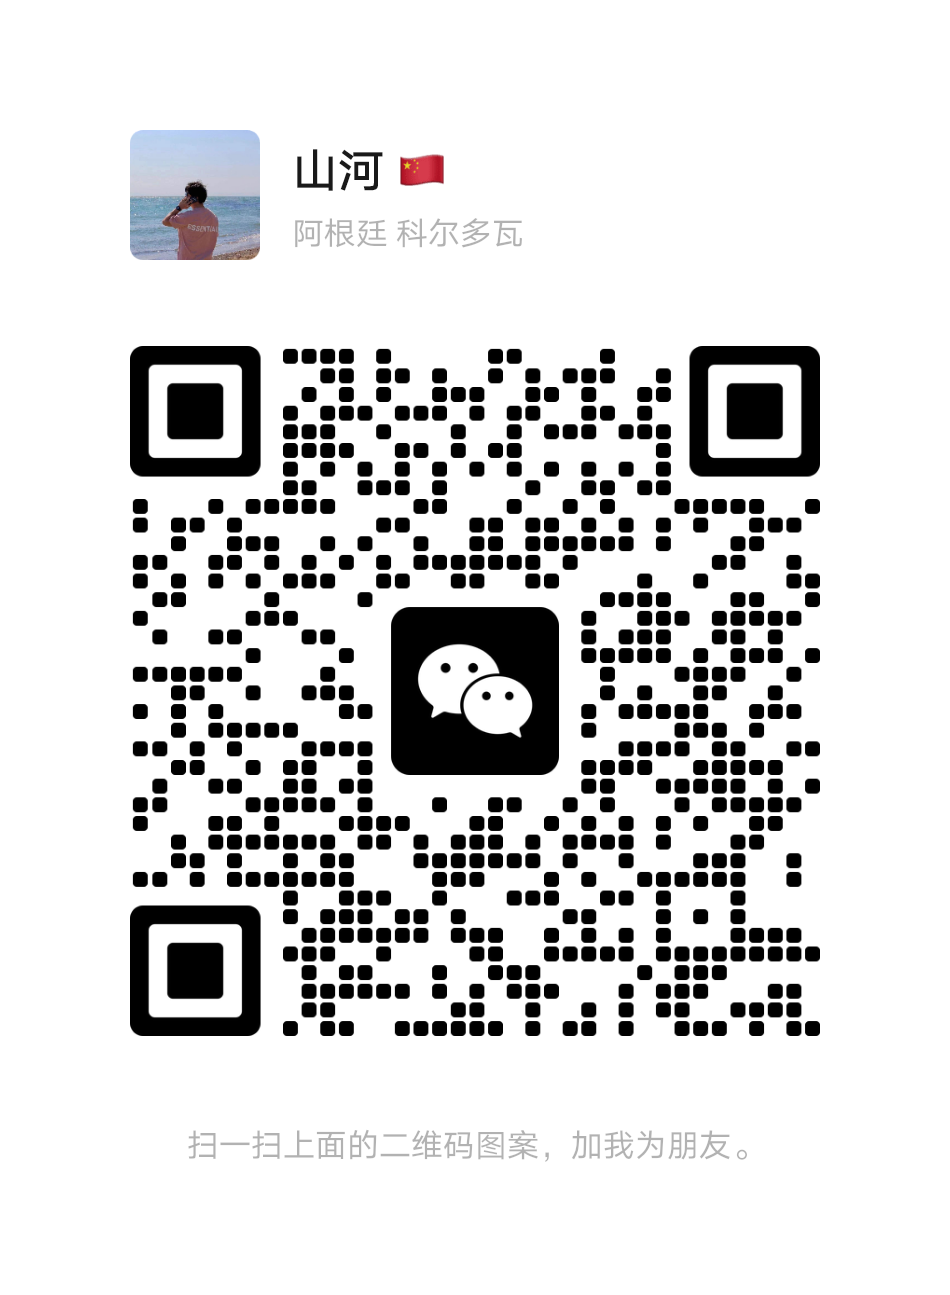 mmqrcode1668480124698.png